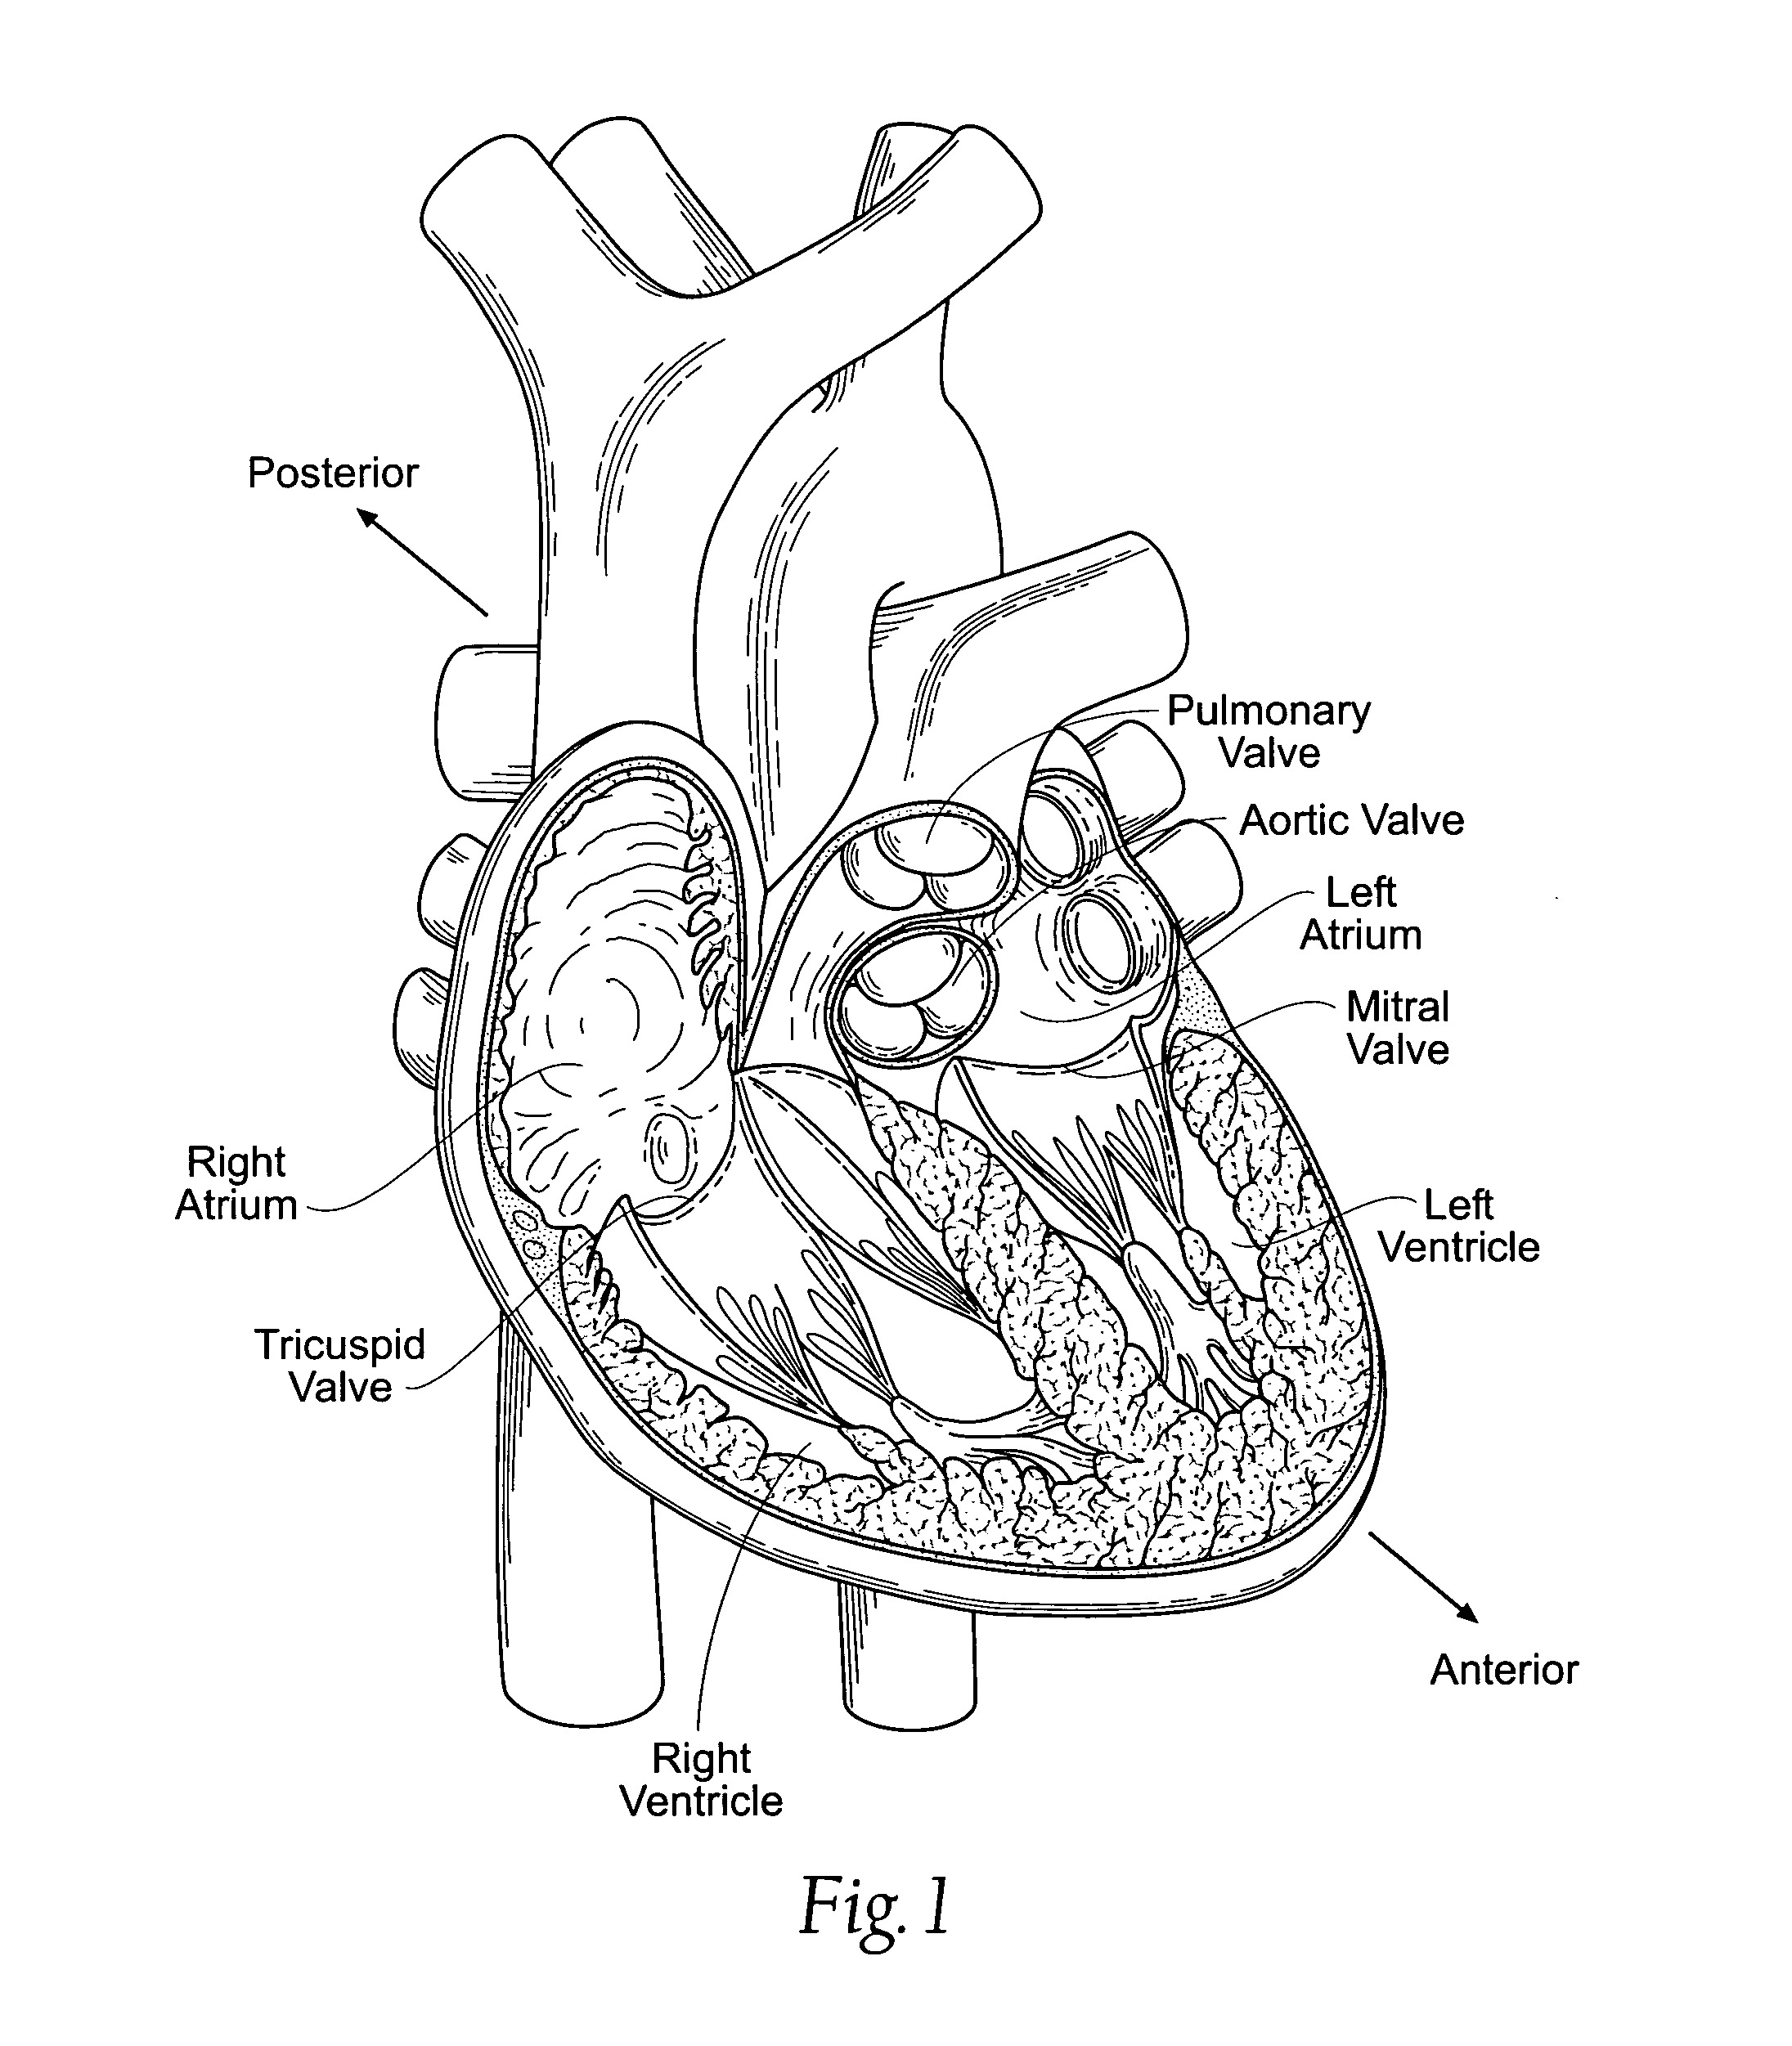 Devices, systems, and methods for supplementing, repairing, or replacing a native heart valve leaflet